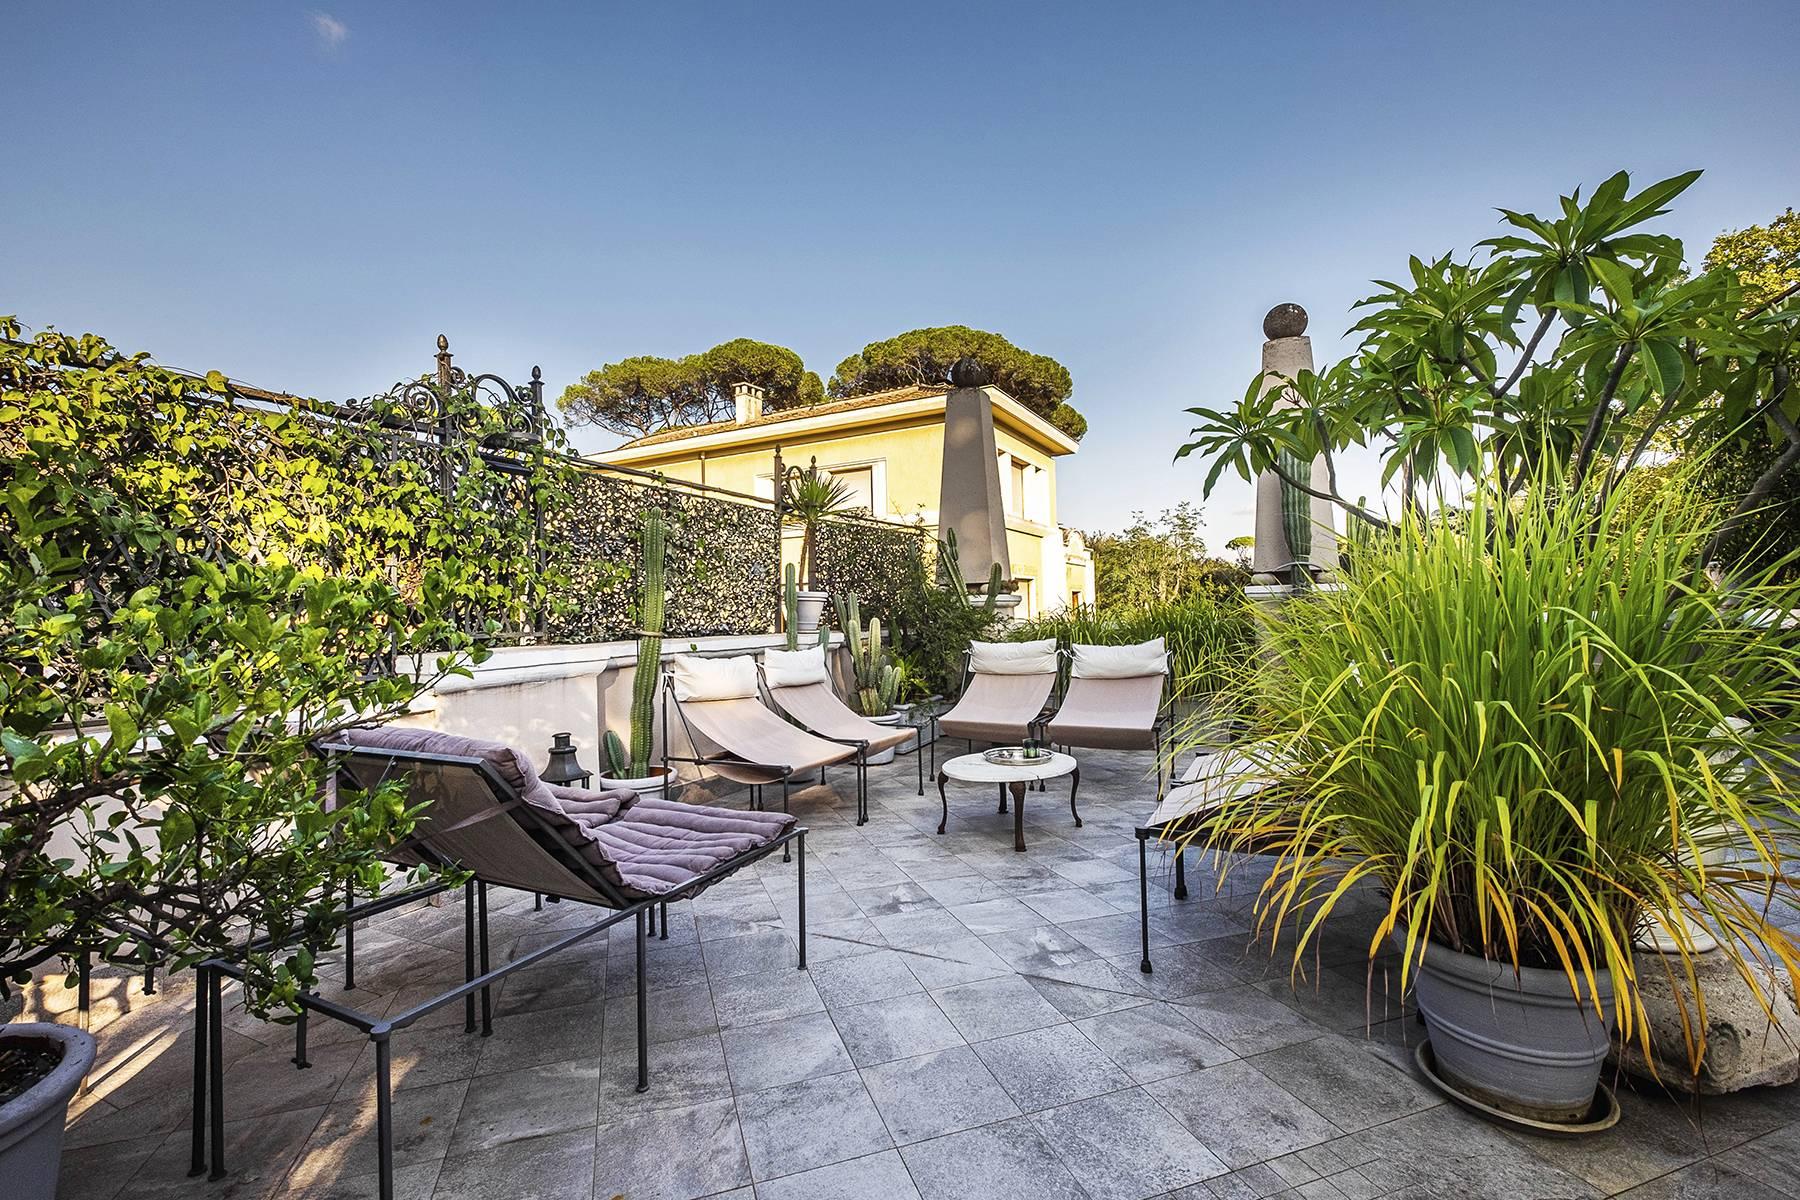 Penthouse with terraces overlooking Villa Borghese - 6